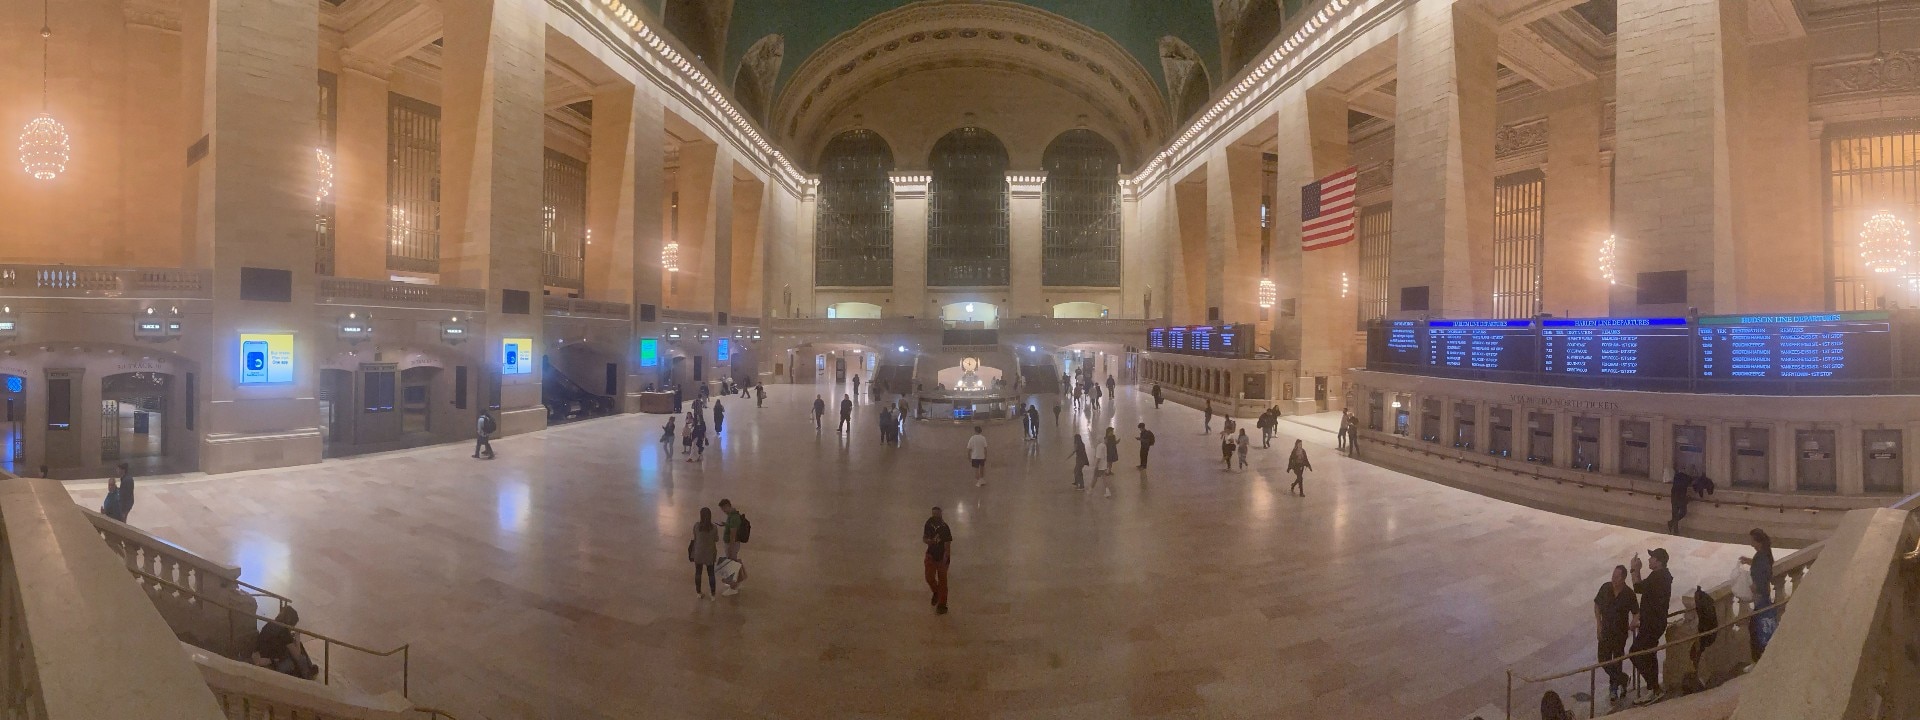 Panoramic view of Grand Central Terminal